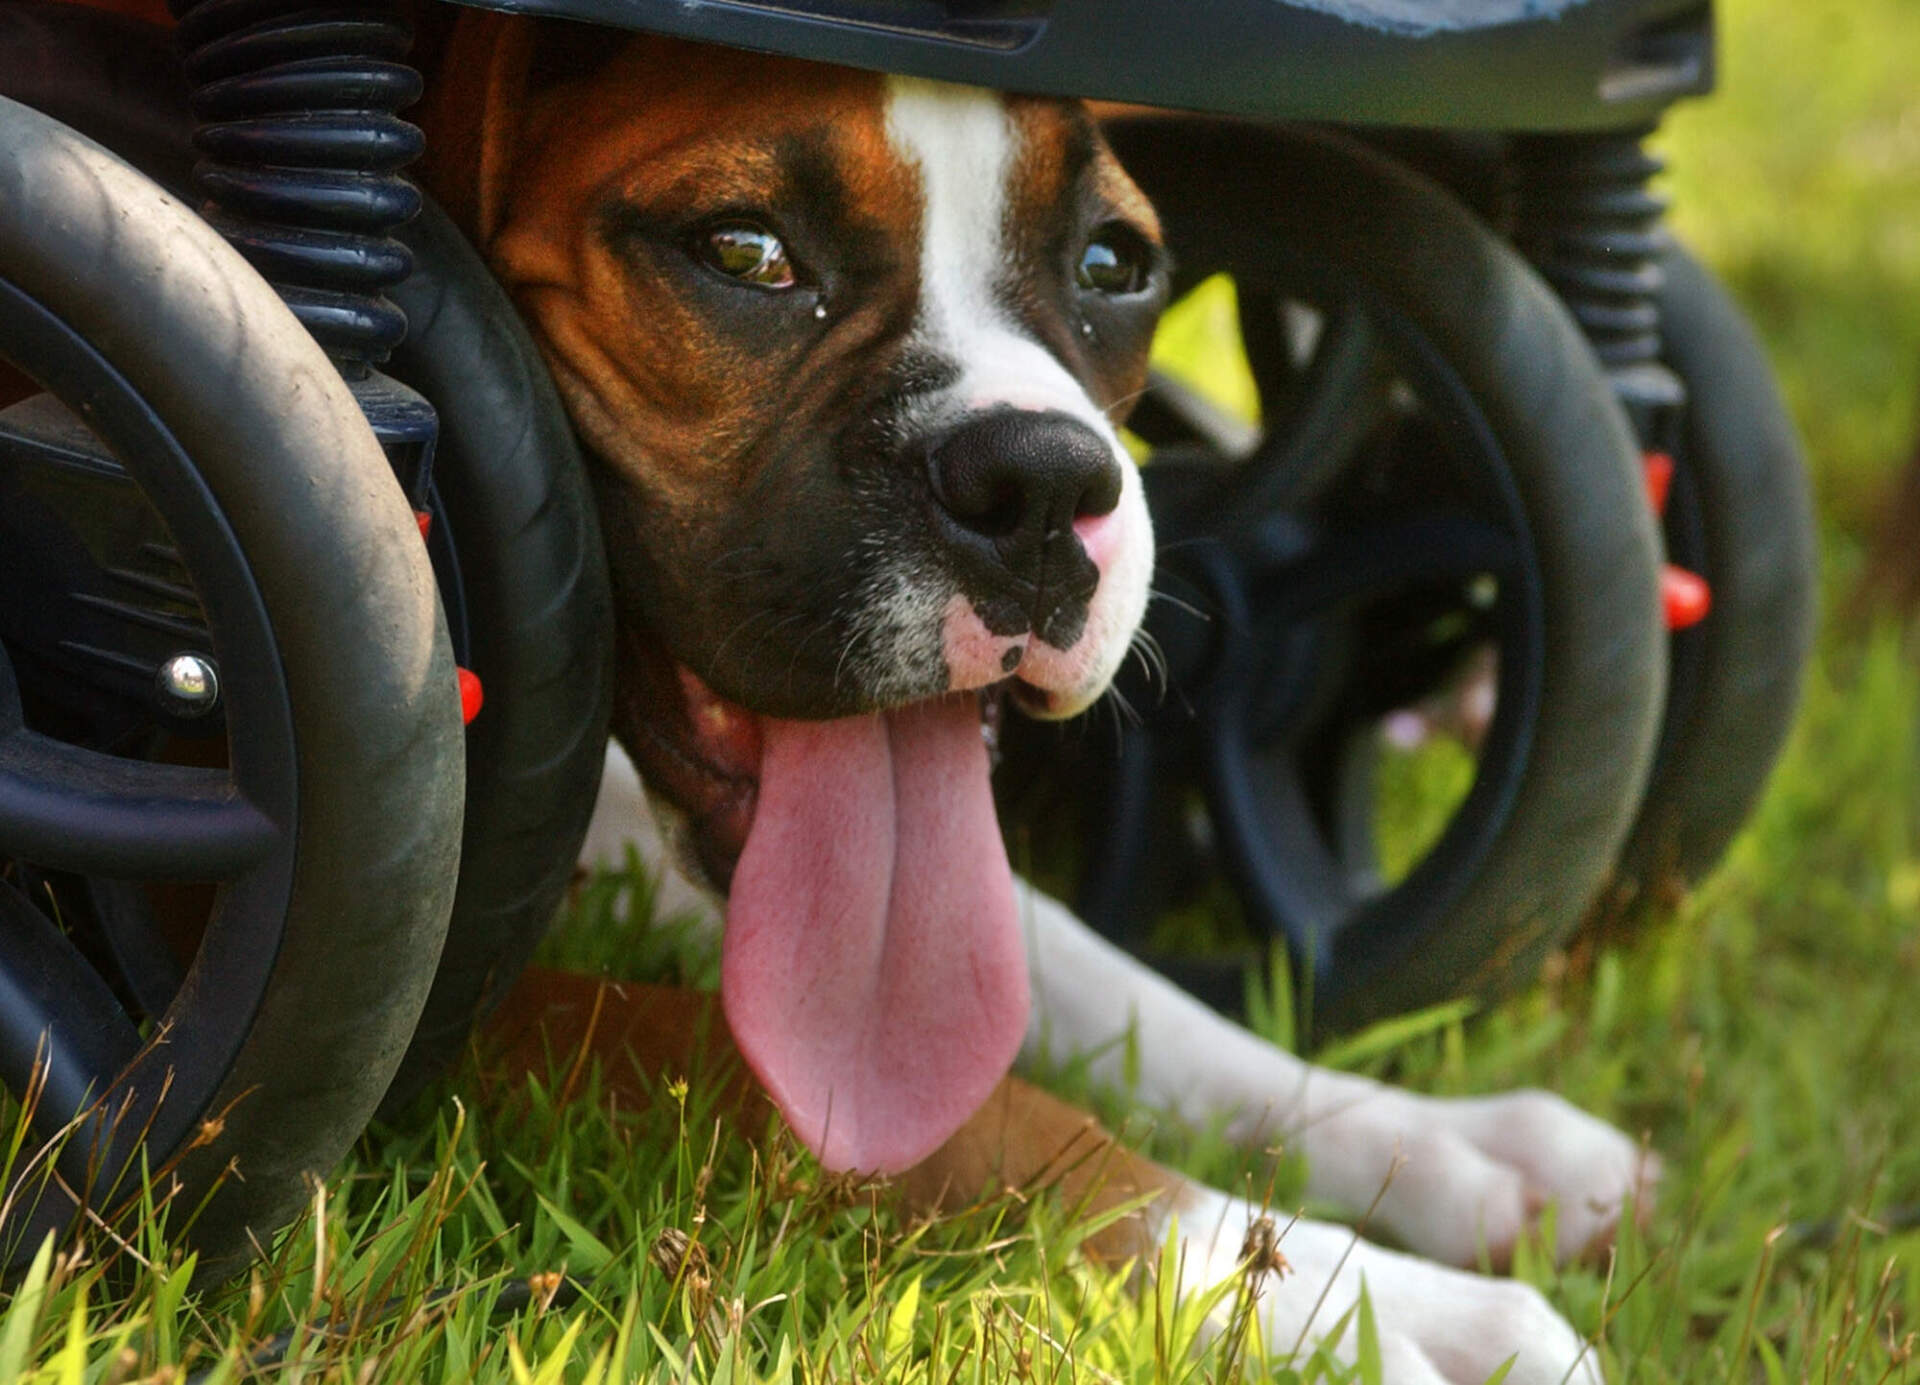 Magic, a 4-month-old boxer owned by Danvers resident Eric Leets, watches the frisbee dog show at the Topsfield Fair from the shade of a baby carriage.(Patrick Whittemore/MediaNews Group/Boston Herald via Getty Images/Archive)